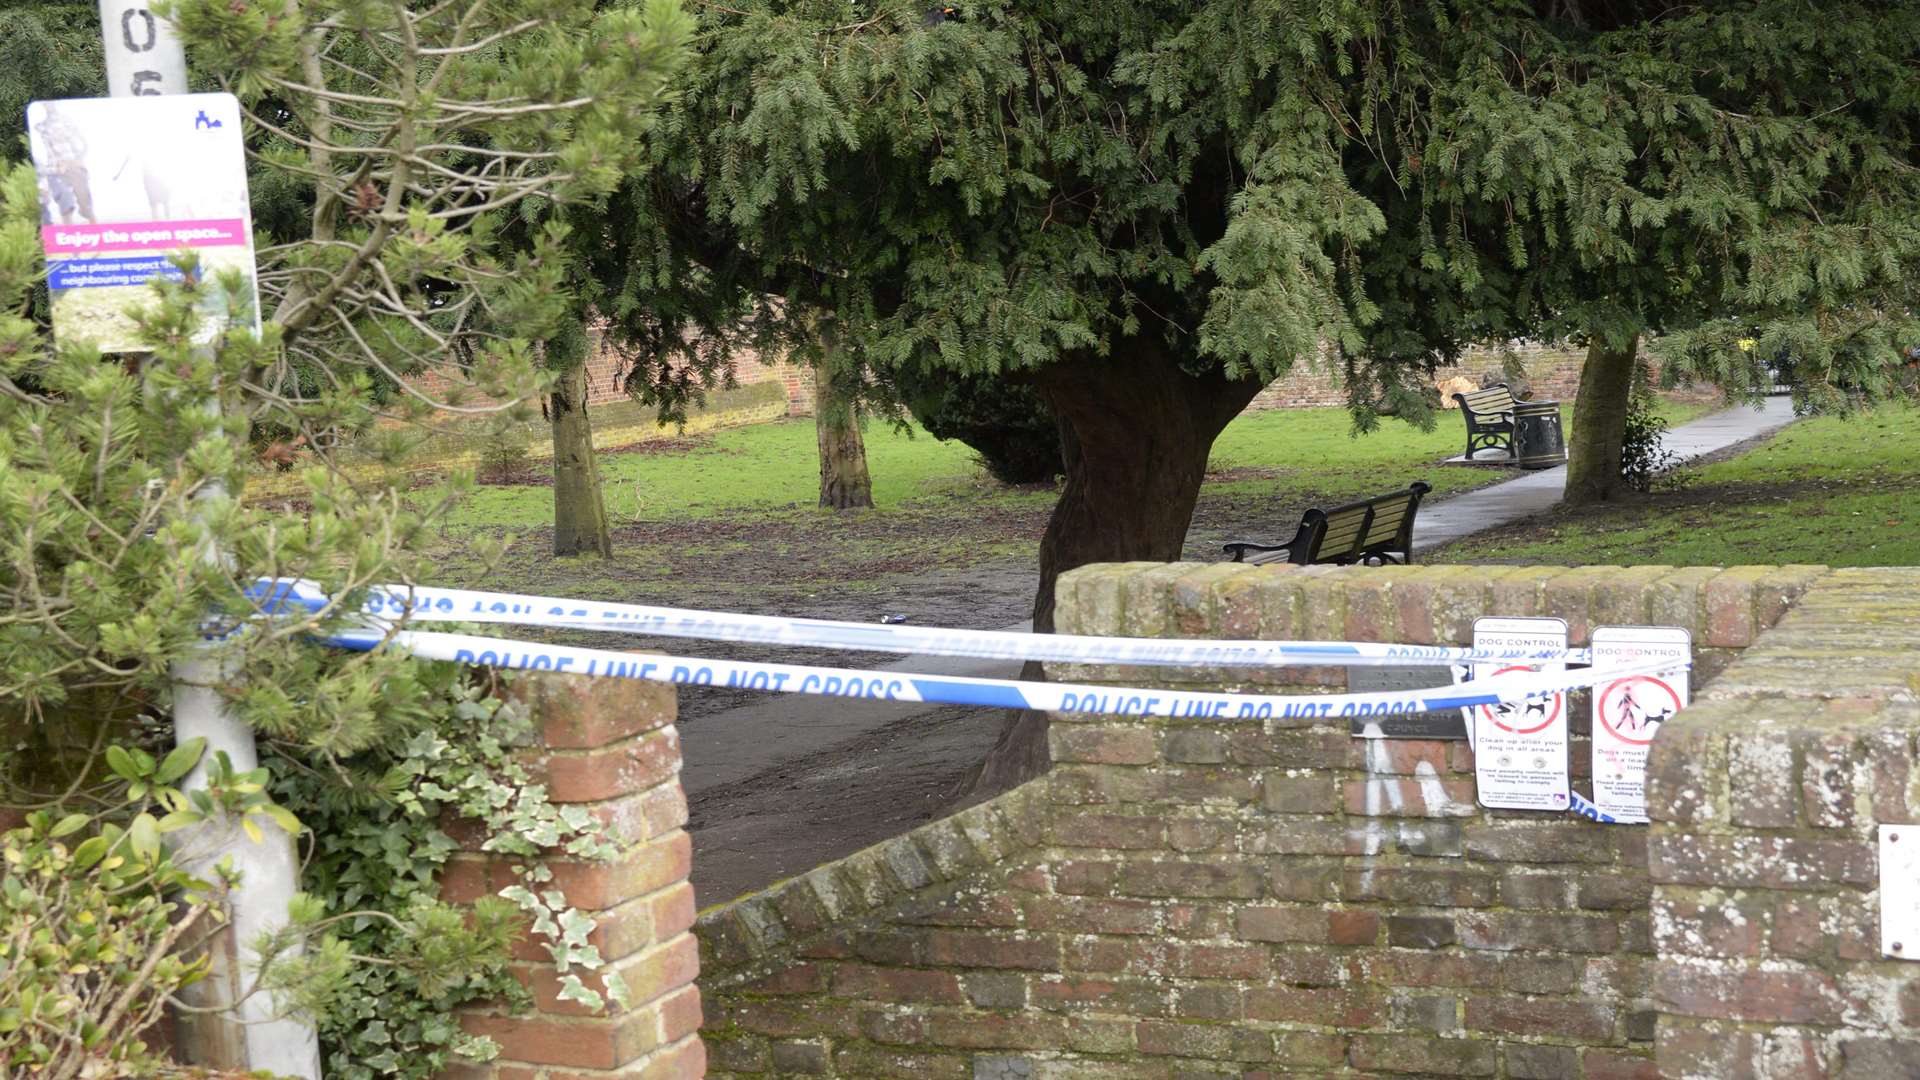 Police had cordoned off the graveyard in Longport after the reported rape.